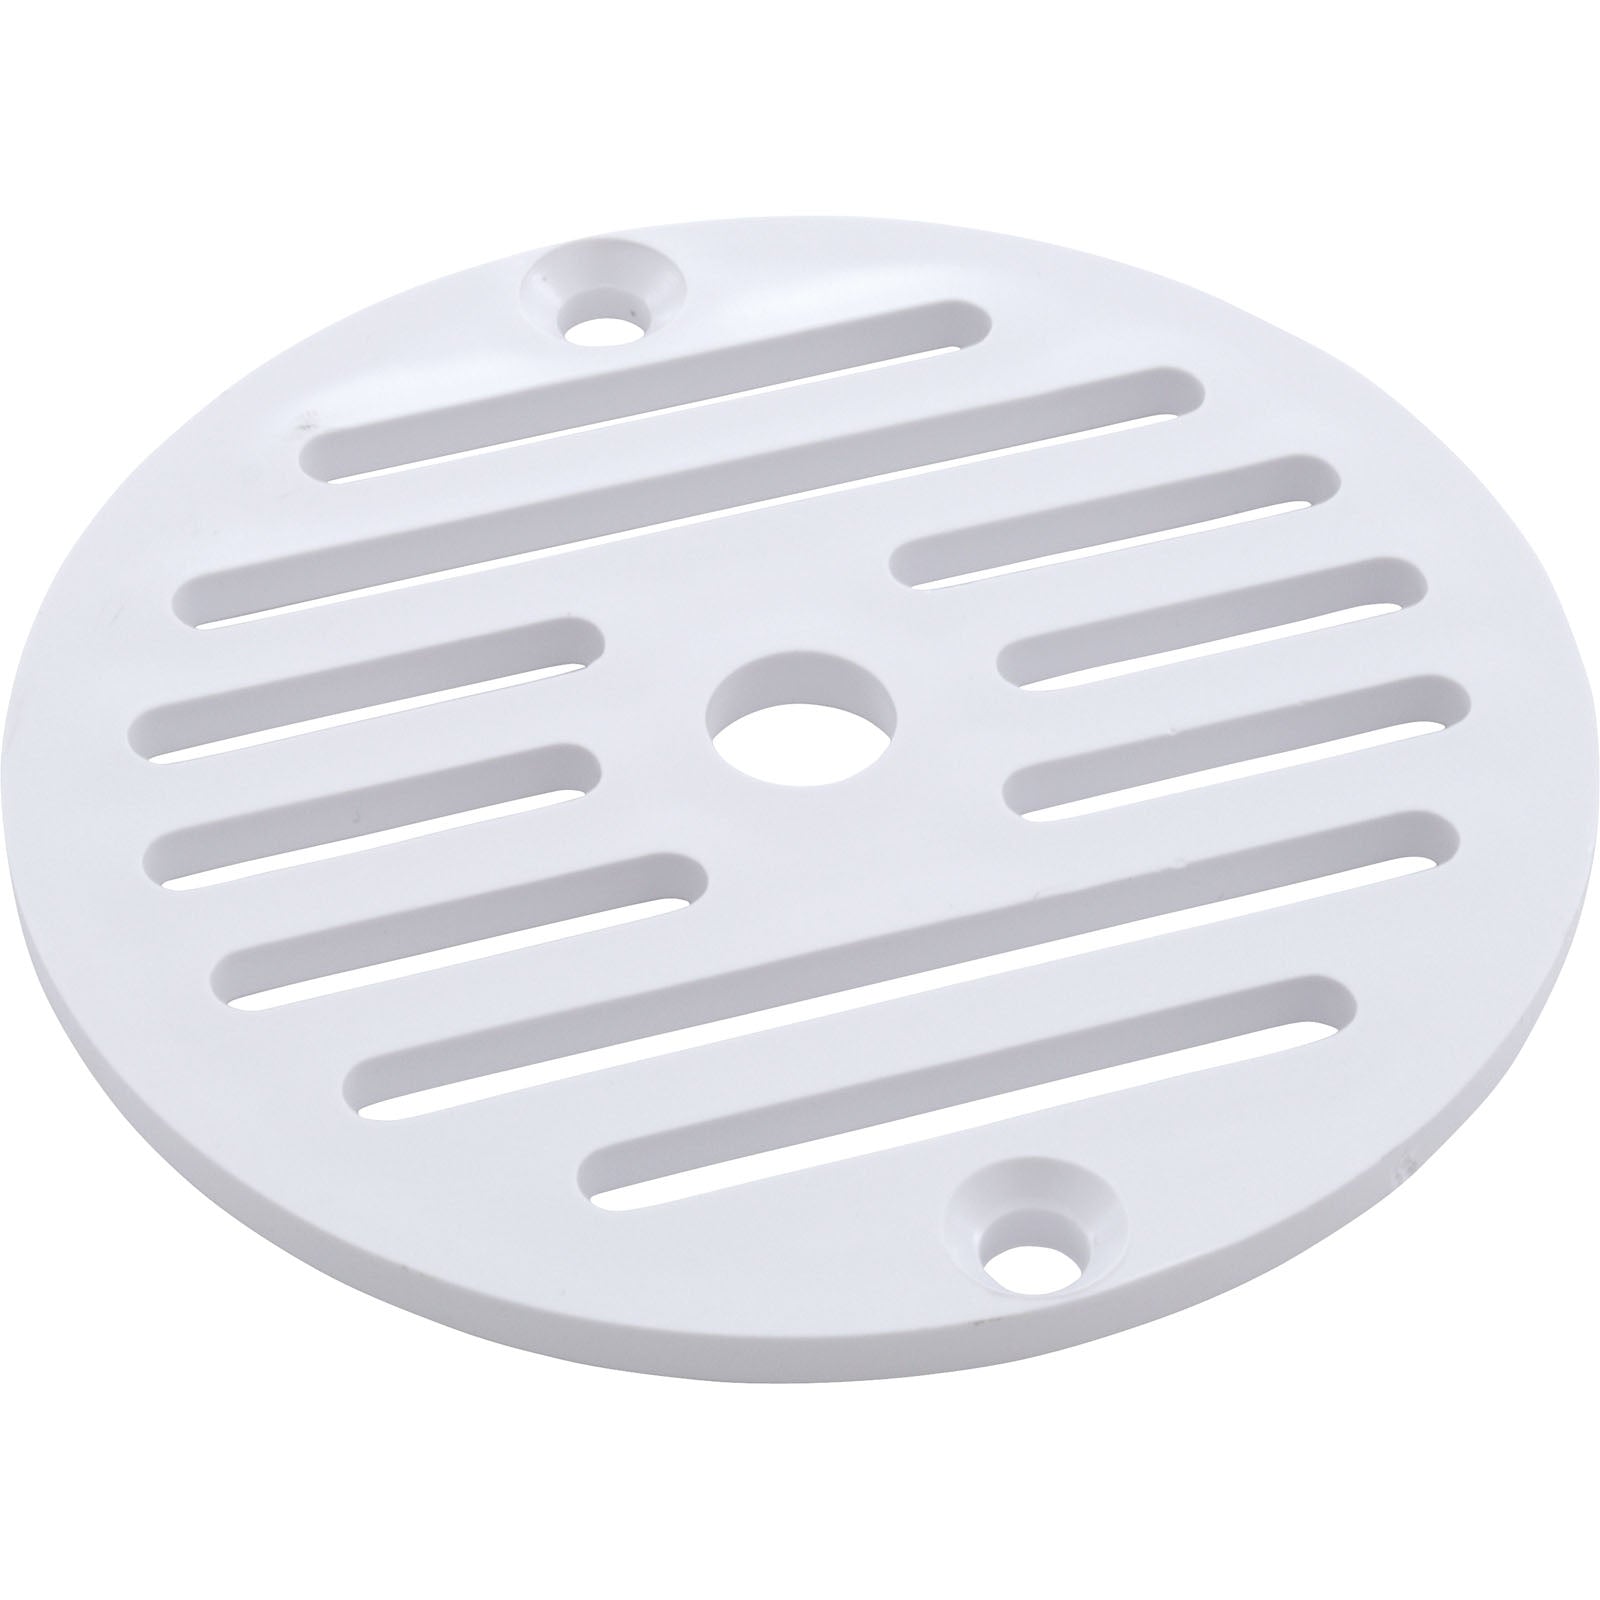 Faceplate Grate, Hayward, 4"fd, Inlet Fitting, White SPX1425C